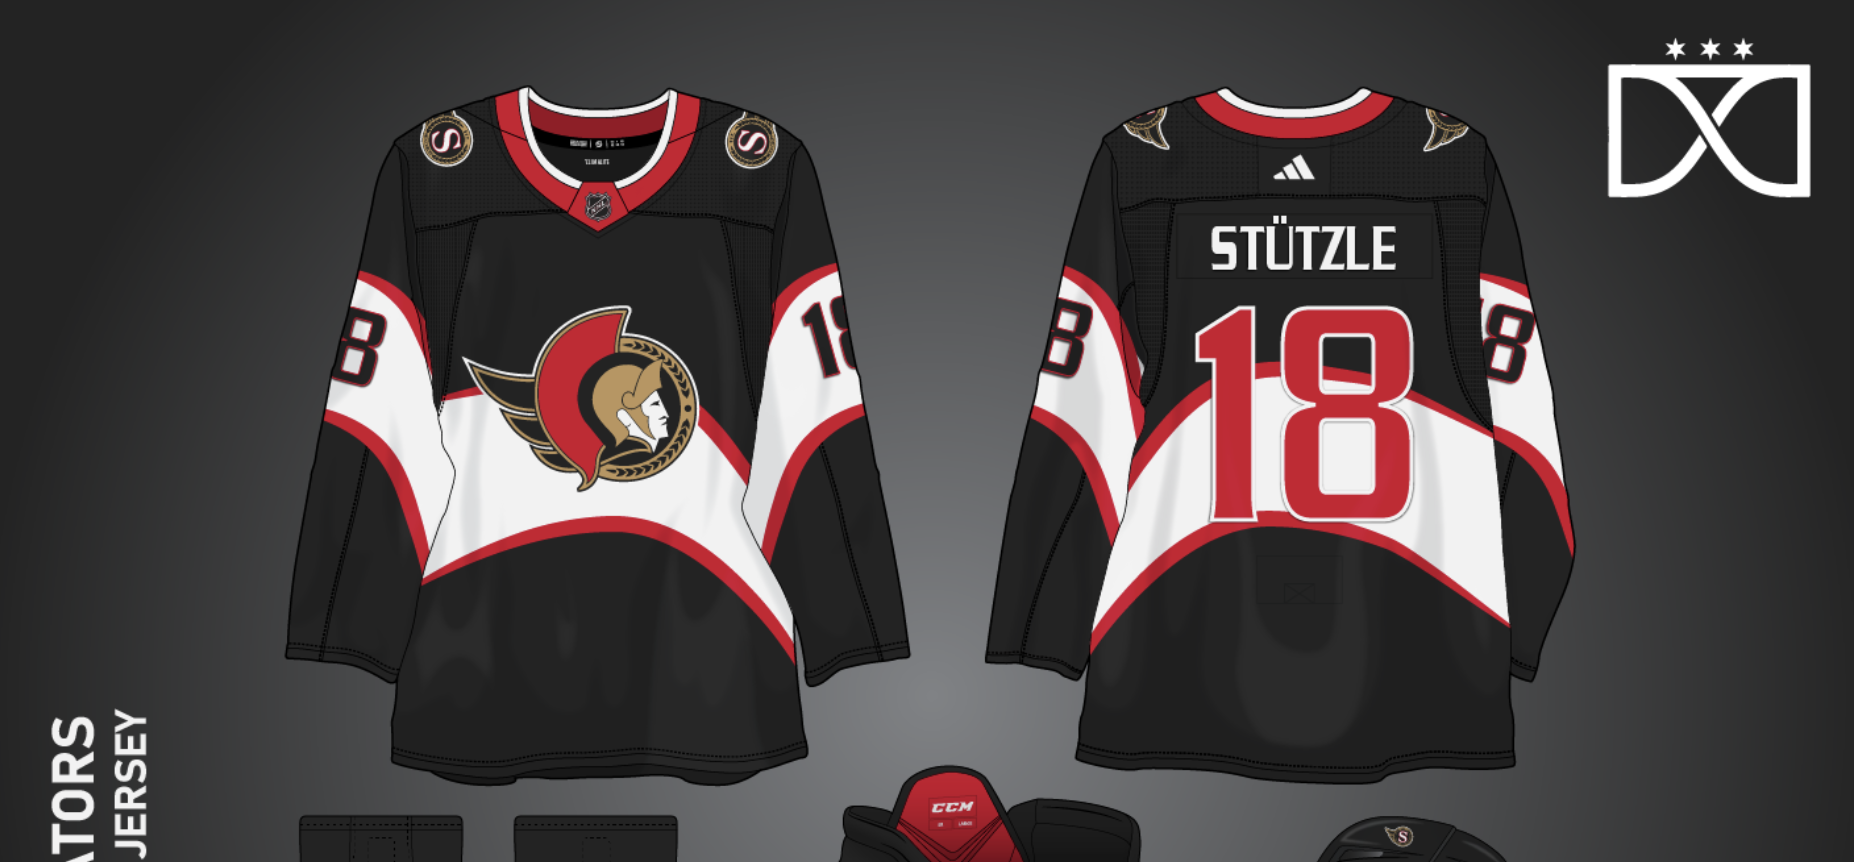 Check Out These Jersey Concepts Created by a 20-Year-Old Multimedia ...